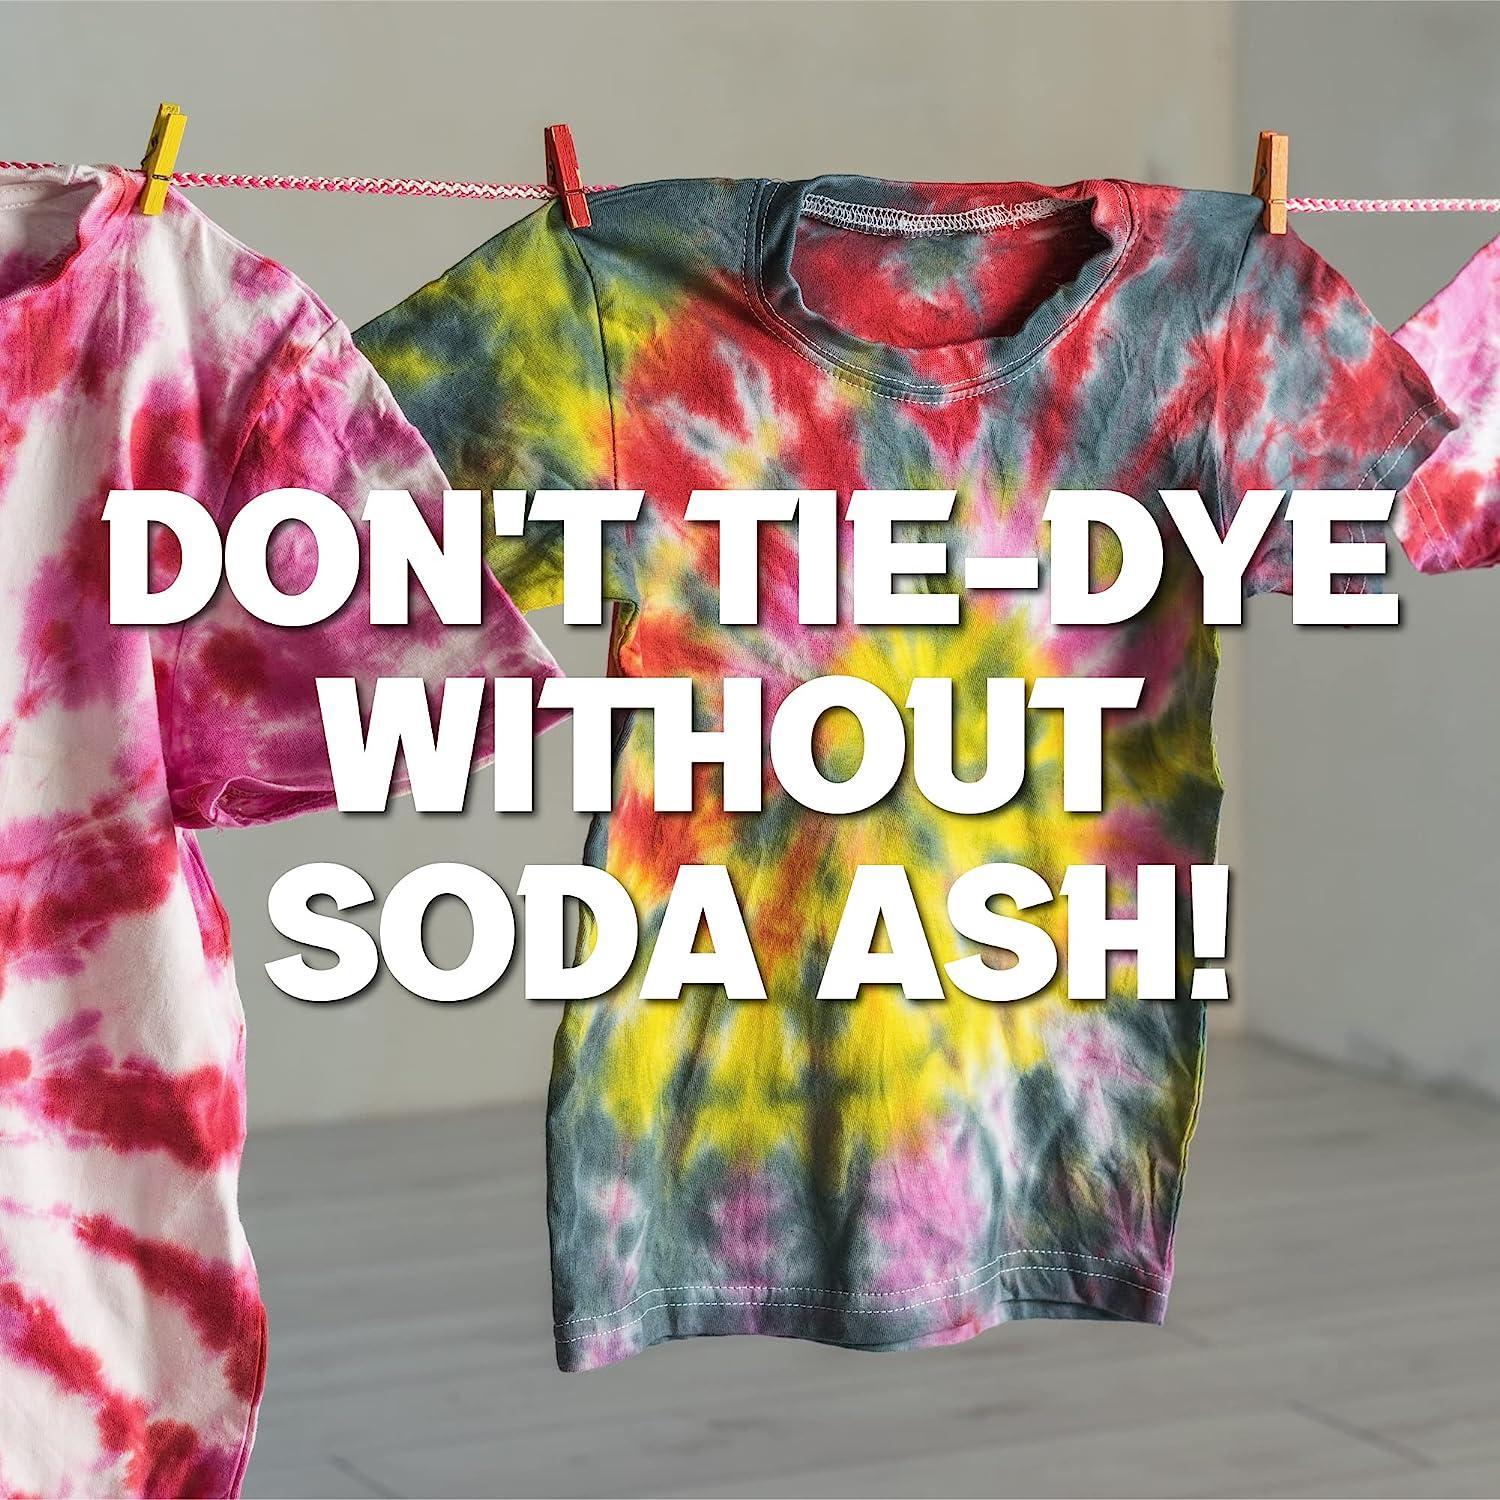 Soda Ash Lite (2 lbs) - 100% Pure Sodium Carbonate - Washing Soda, Tie Die,  pH Increaser, and More - HDPE Container w/Resealable Child Resistant Cap